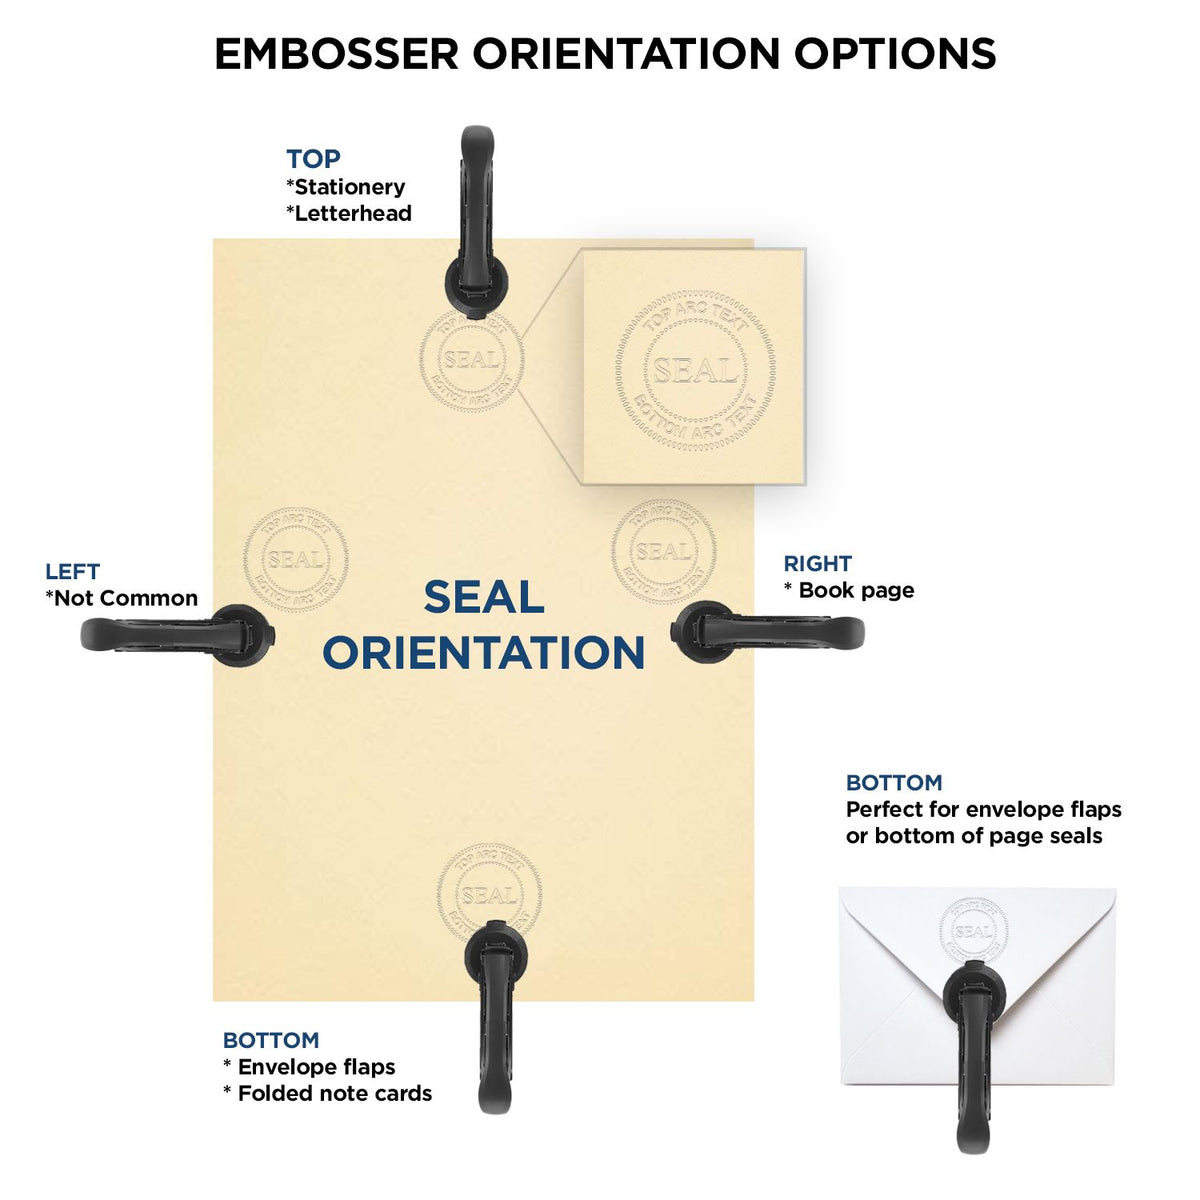 An infographic for the Heavy Duty Cast Iron Massachusetts Geologist Seal Embosser showing embosser orientation, this is showing examples of a top, bottom, right and left insert.